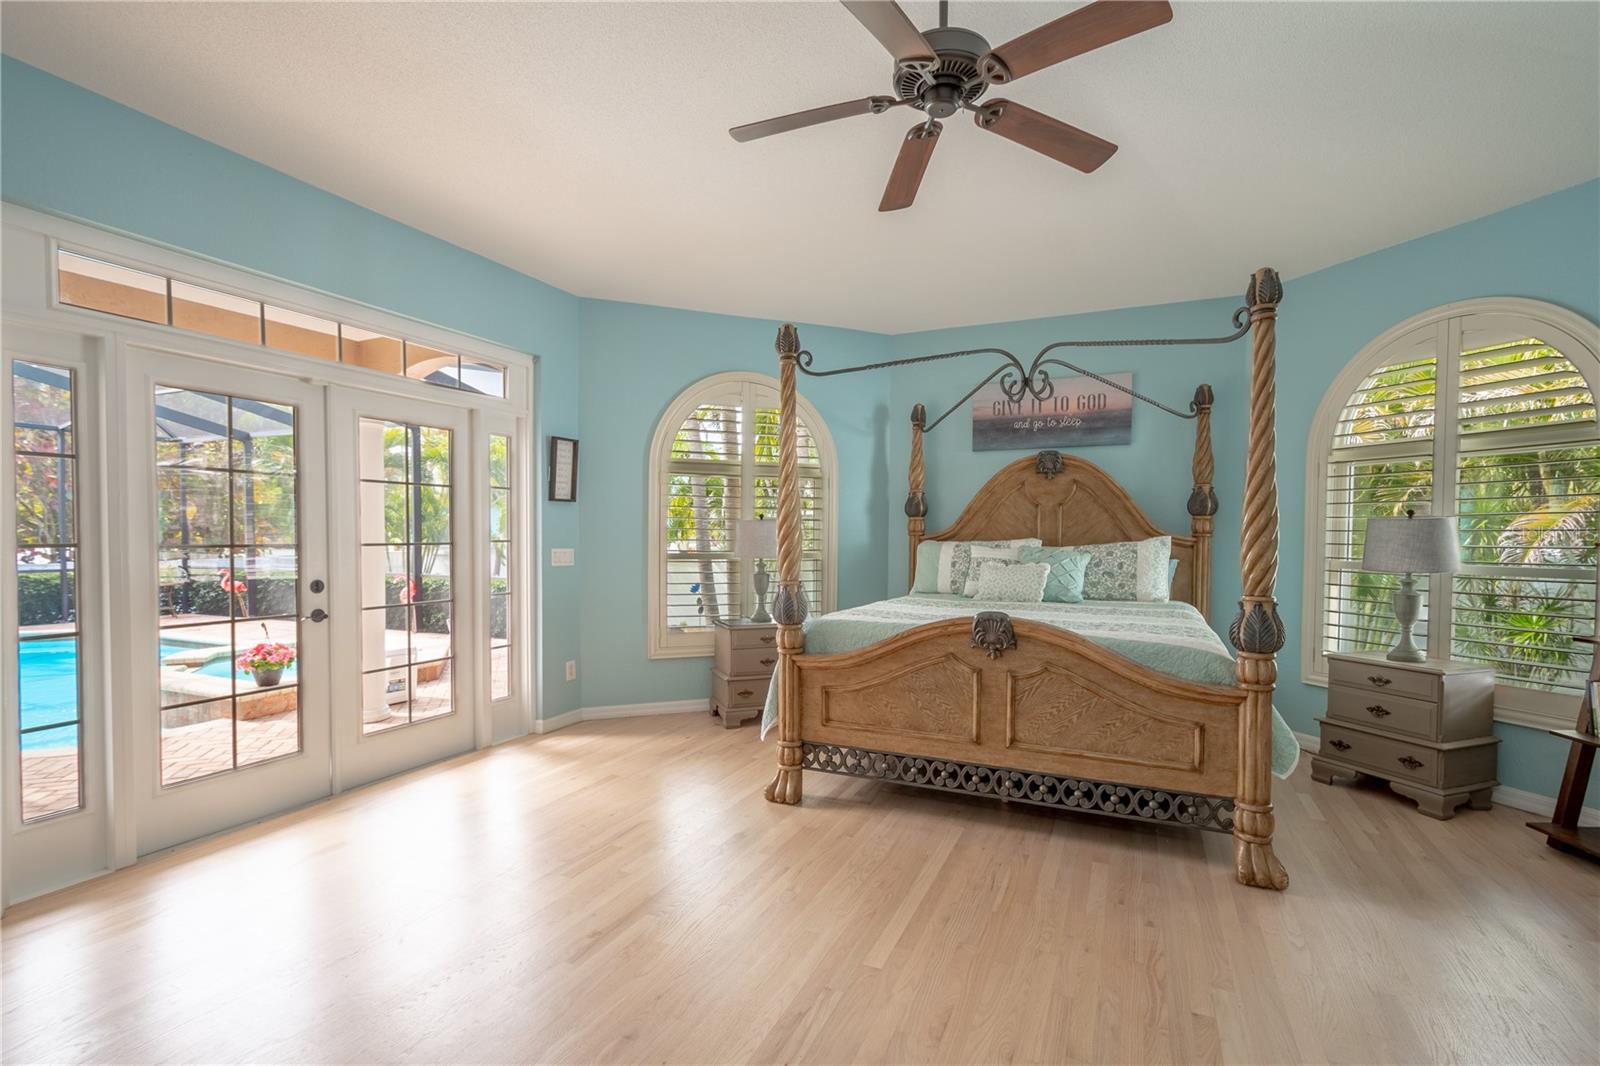 HThe spacious primary bedroom features high ceilings with ceiling fan and wood floors.